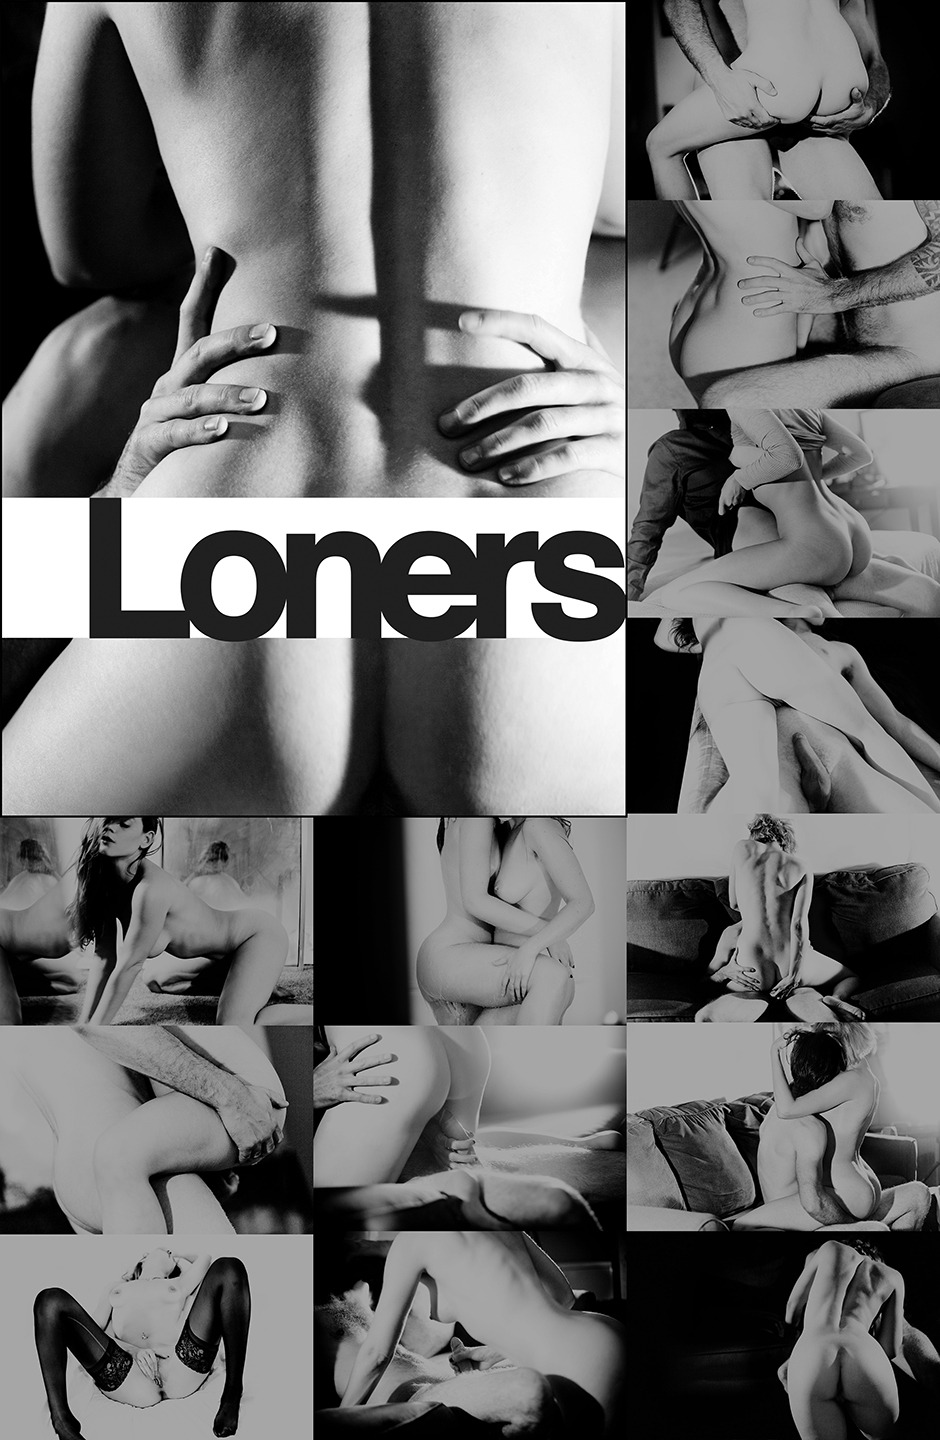 The sequel to my large zine CHEATERS is finally here! LONERS is the second part